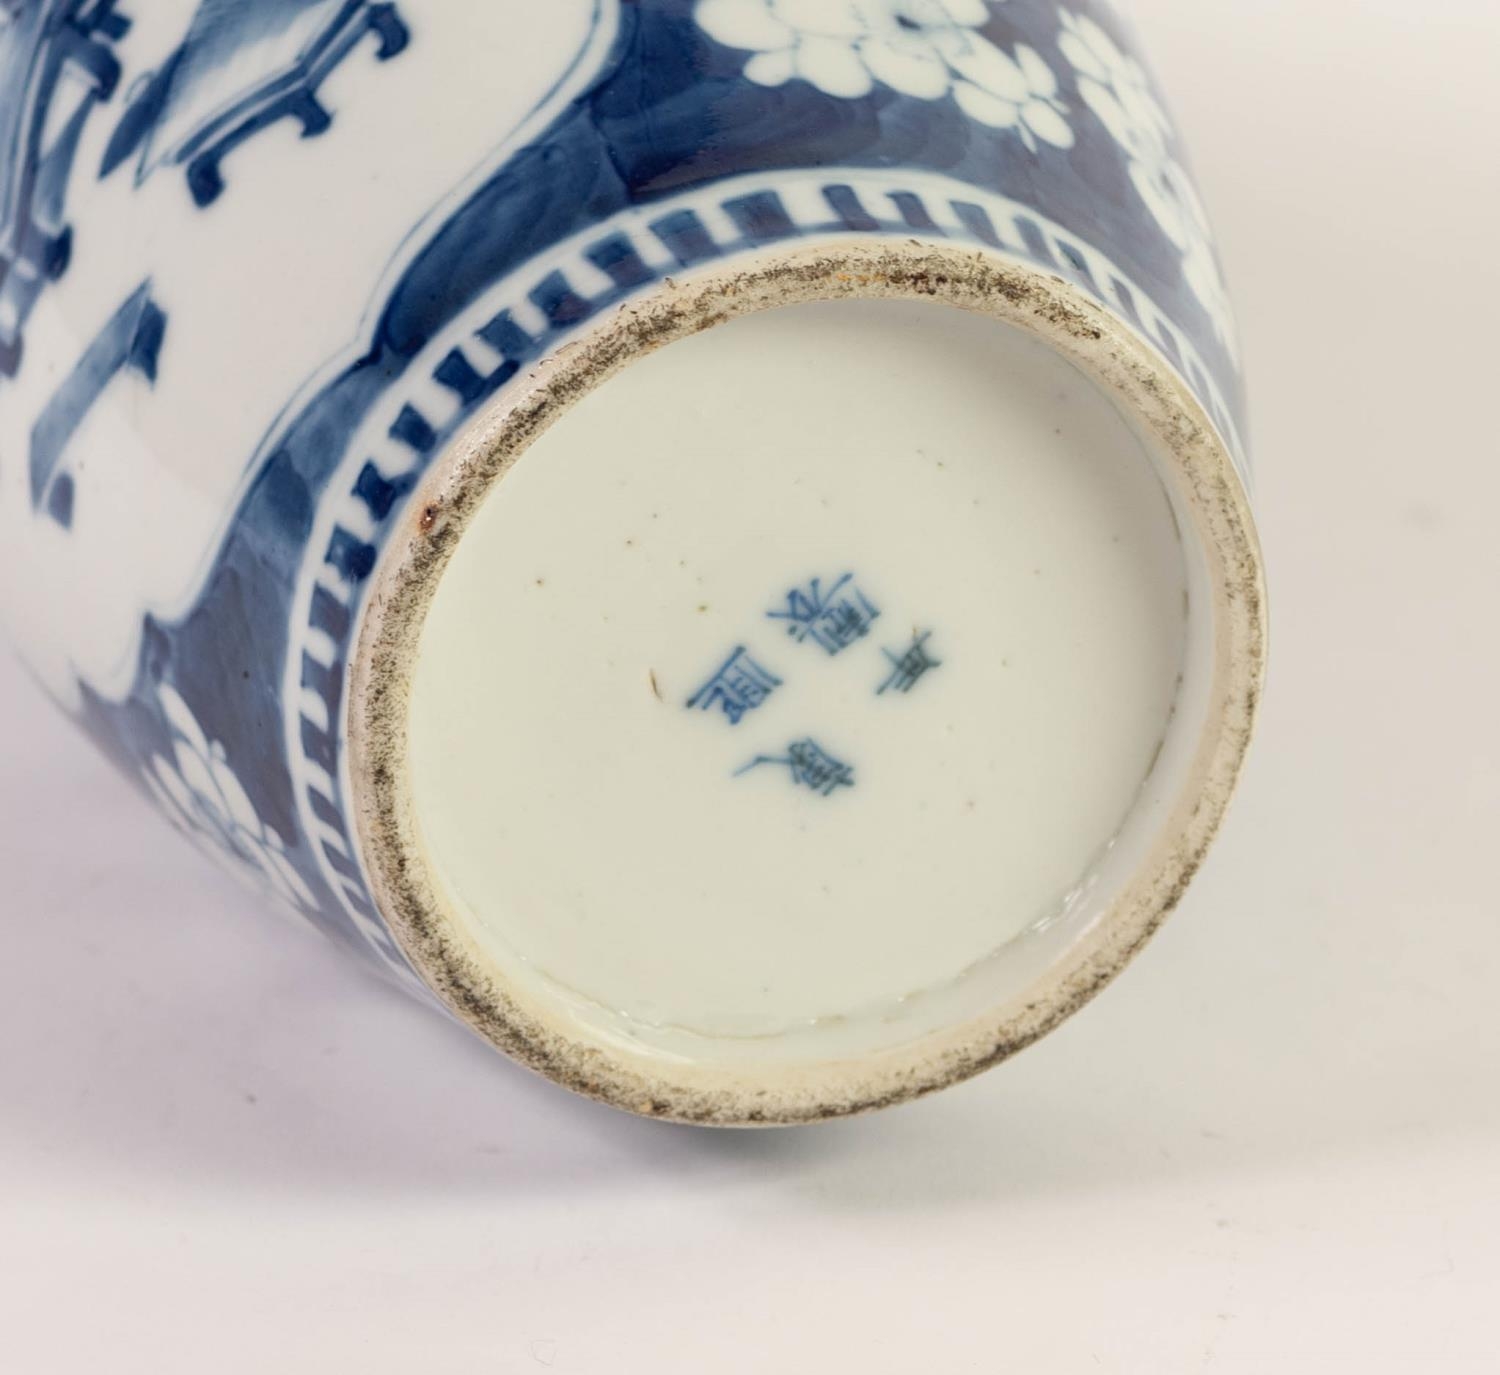 CHINESE LATE QING DYNASTY BLUE AND WHITE PORCELAIN VASE, of ovoid form with waisted neck, painted - Image 3 of 3